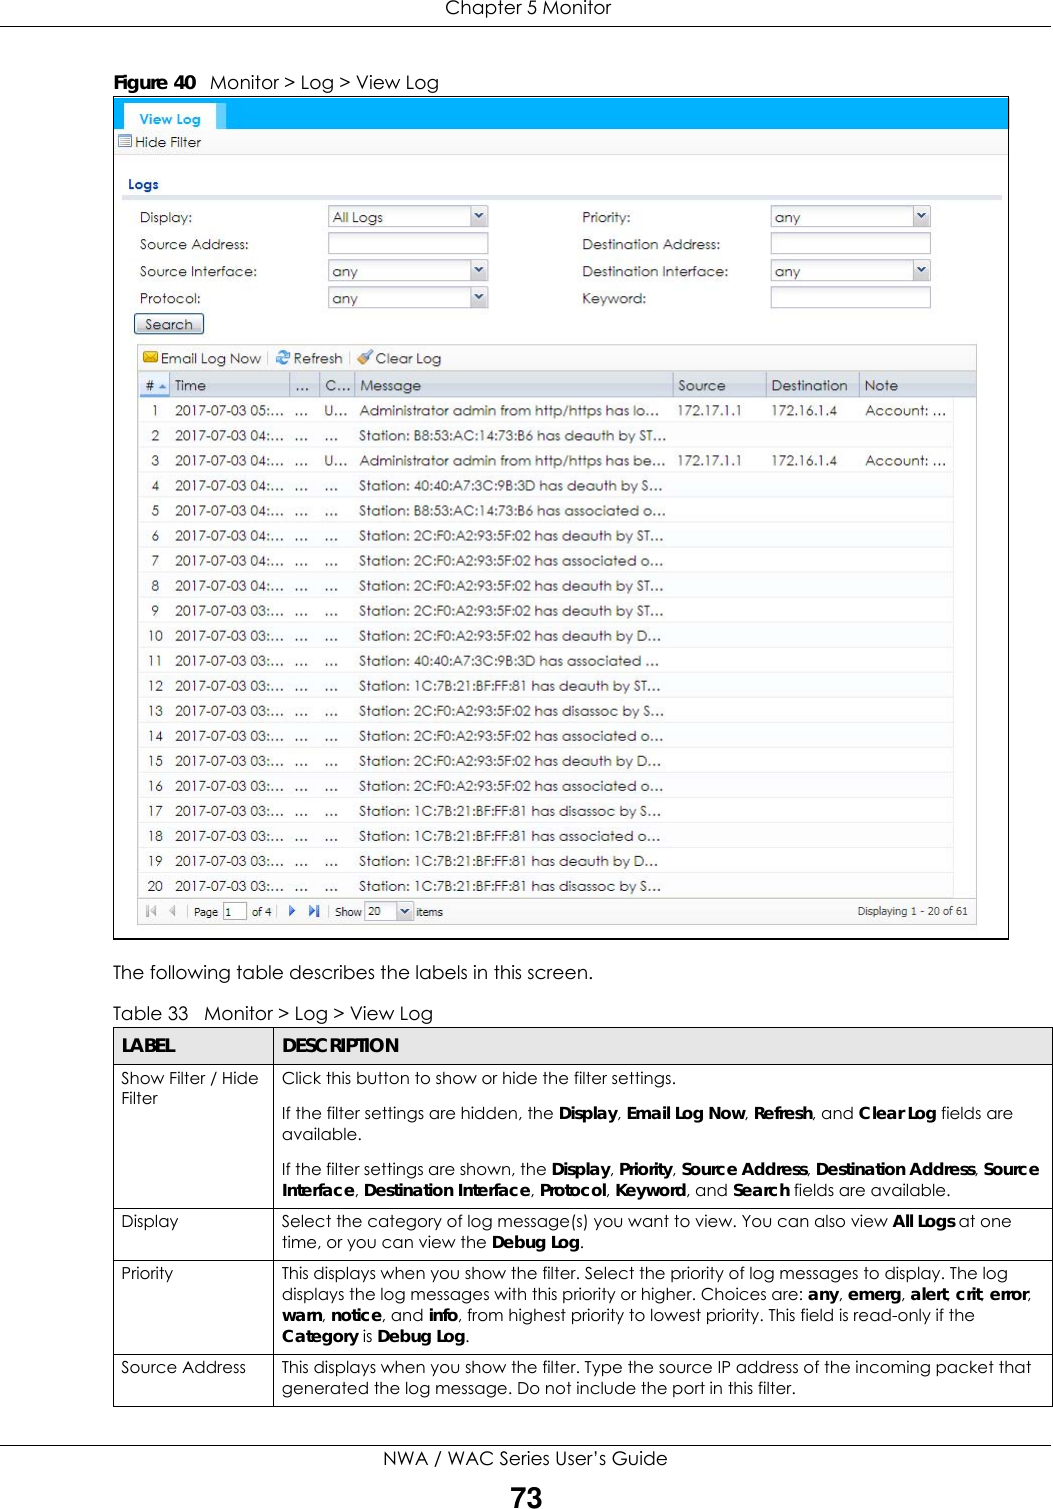  Chapter 5 MonitorNWA / WAC Series User’s Guide73Figure 40   Monitor &gt; Log &gt; View LogThe following table describes the labels in this screen.  Table 33   Monitor &gt; Log &gt; View LogLABEL DESCRIPTIONShow Filter / Hide FilterClick this button to show or hide the filter settings.If the filter settings are hidden, the Display, Email Log Now, Refresh, and Clear Log fields are available.If the filter settings are shown, the Display, Priority, Source Address, Destination Address, Source Interface, Destination Interface, Protocol, Keyword, and Search fields are available.Display Select the category of log message(s) you want to view. You can also view All Logs at one time, or you can view the Debug Log.Priority This displays when you show the filter. Select the priority of log messages to display. The log displays the log messages with this priority or higher. Choices are: any, emerg, alert, crit, error, warn, notice, and info, from highest priority to lowest priority. This field is read-only if the Category is Debug Log. Source Address This displays when you show the filter. Type the source IP address of the incoming packet that generated the log message. Do not include the port in this filter.